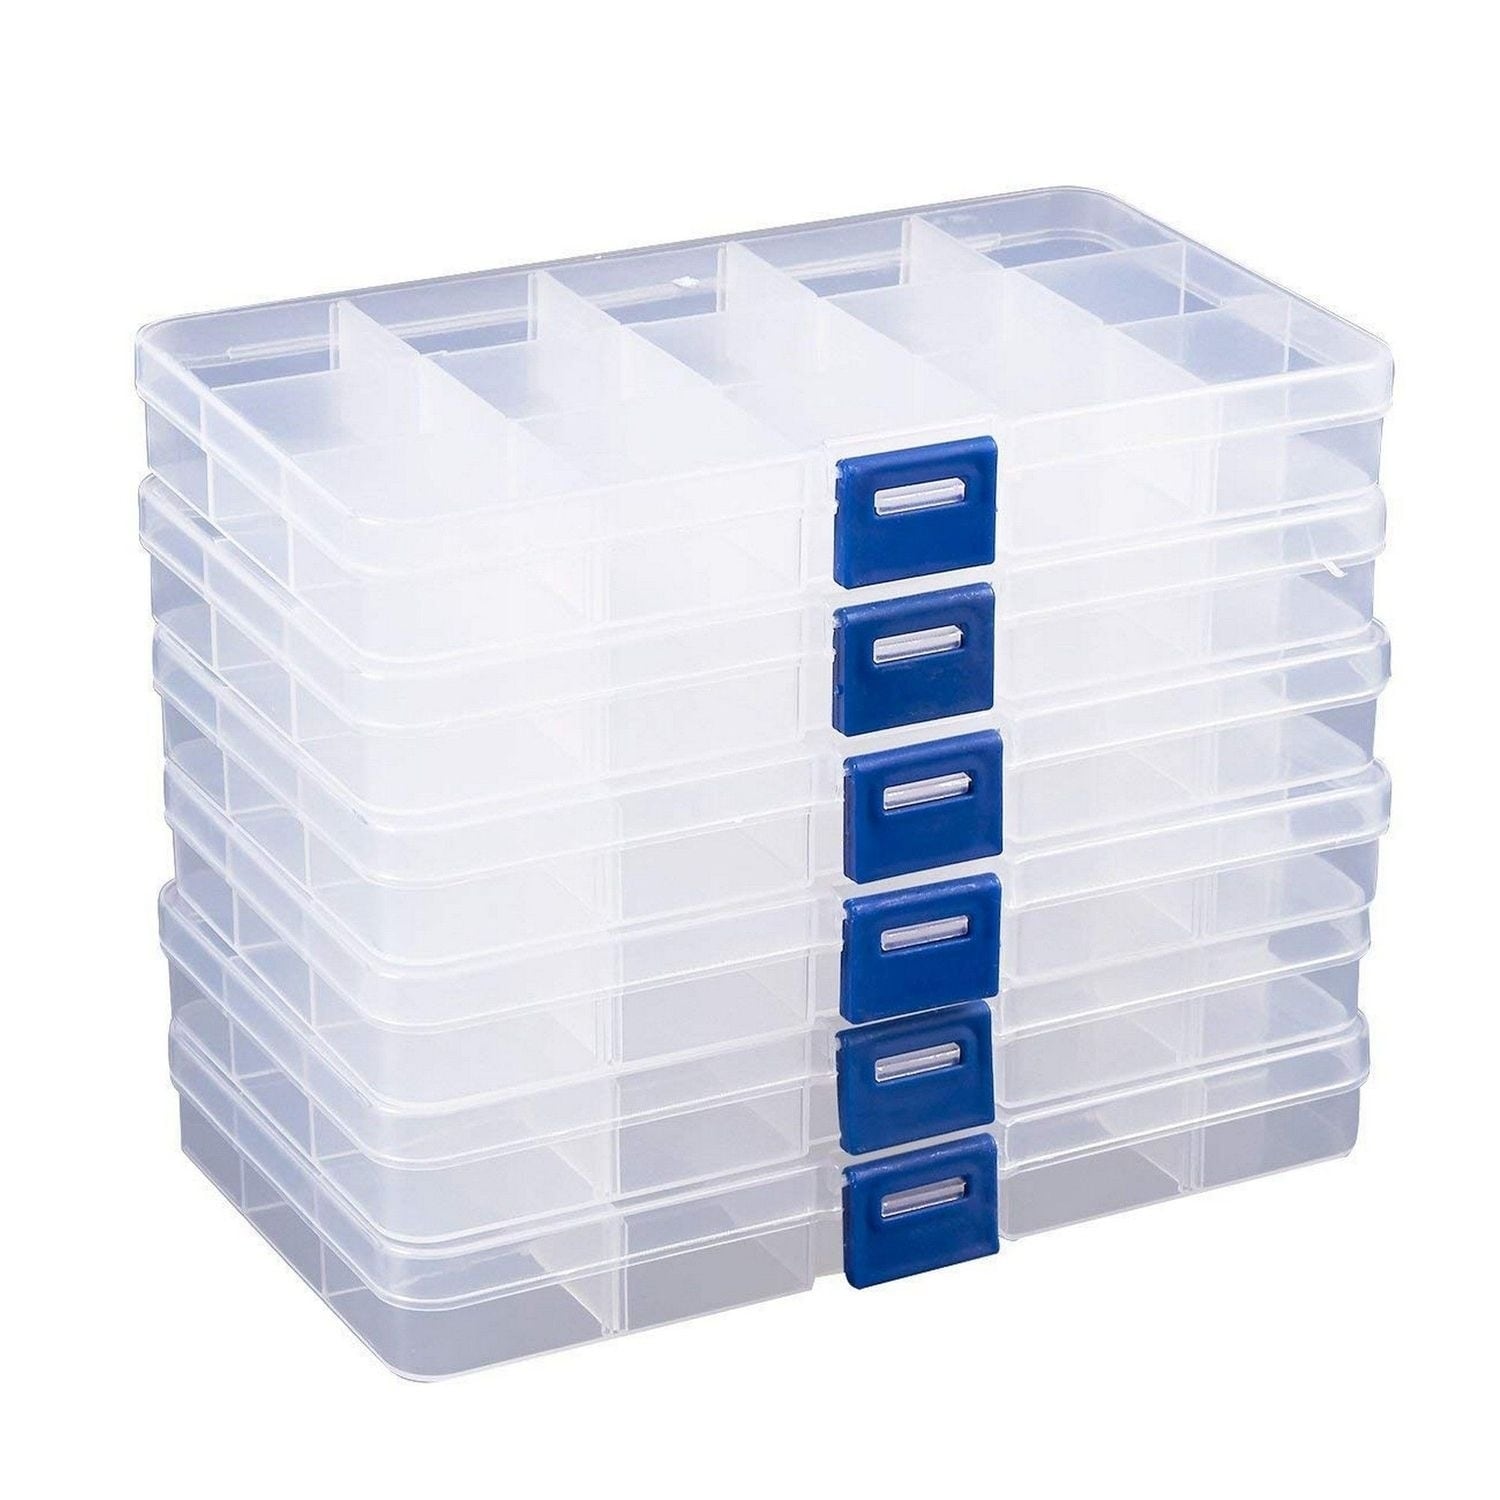 Black iBune 18 Grids Plastic Compartment Container Bead Storage Organizer Box Case for Jewelry Craft Tackles Screws Nails Size 10.9 x 7.7 x 1.7 in 